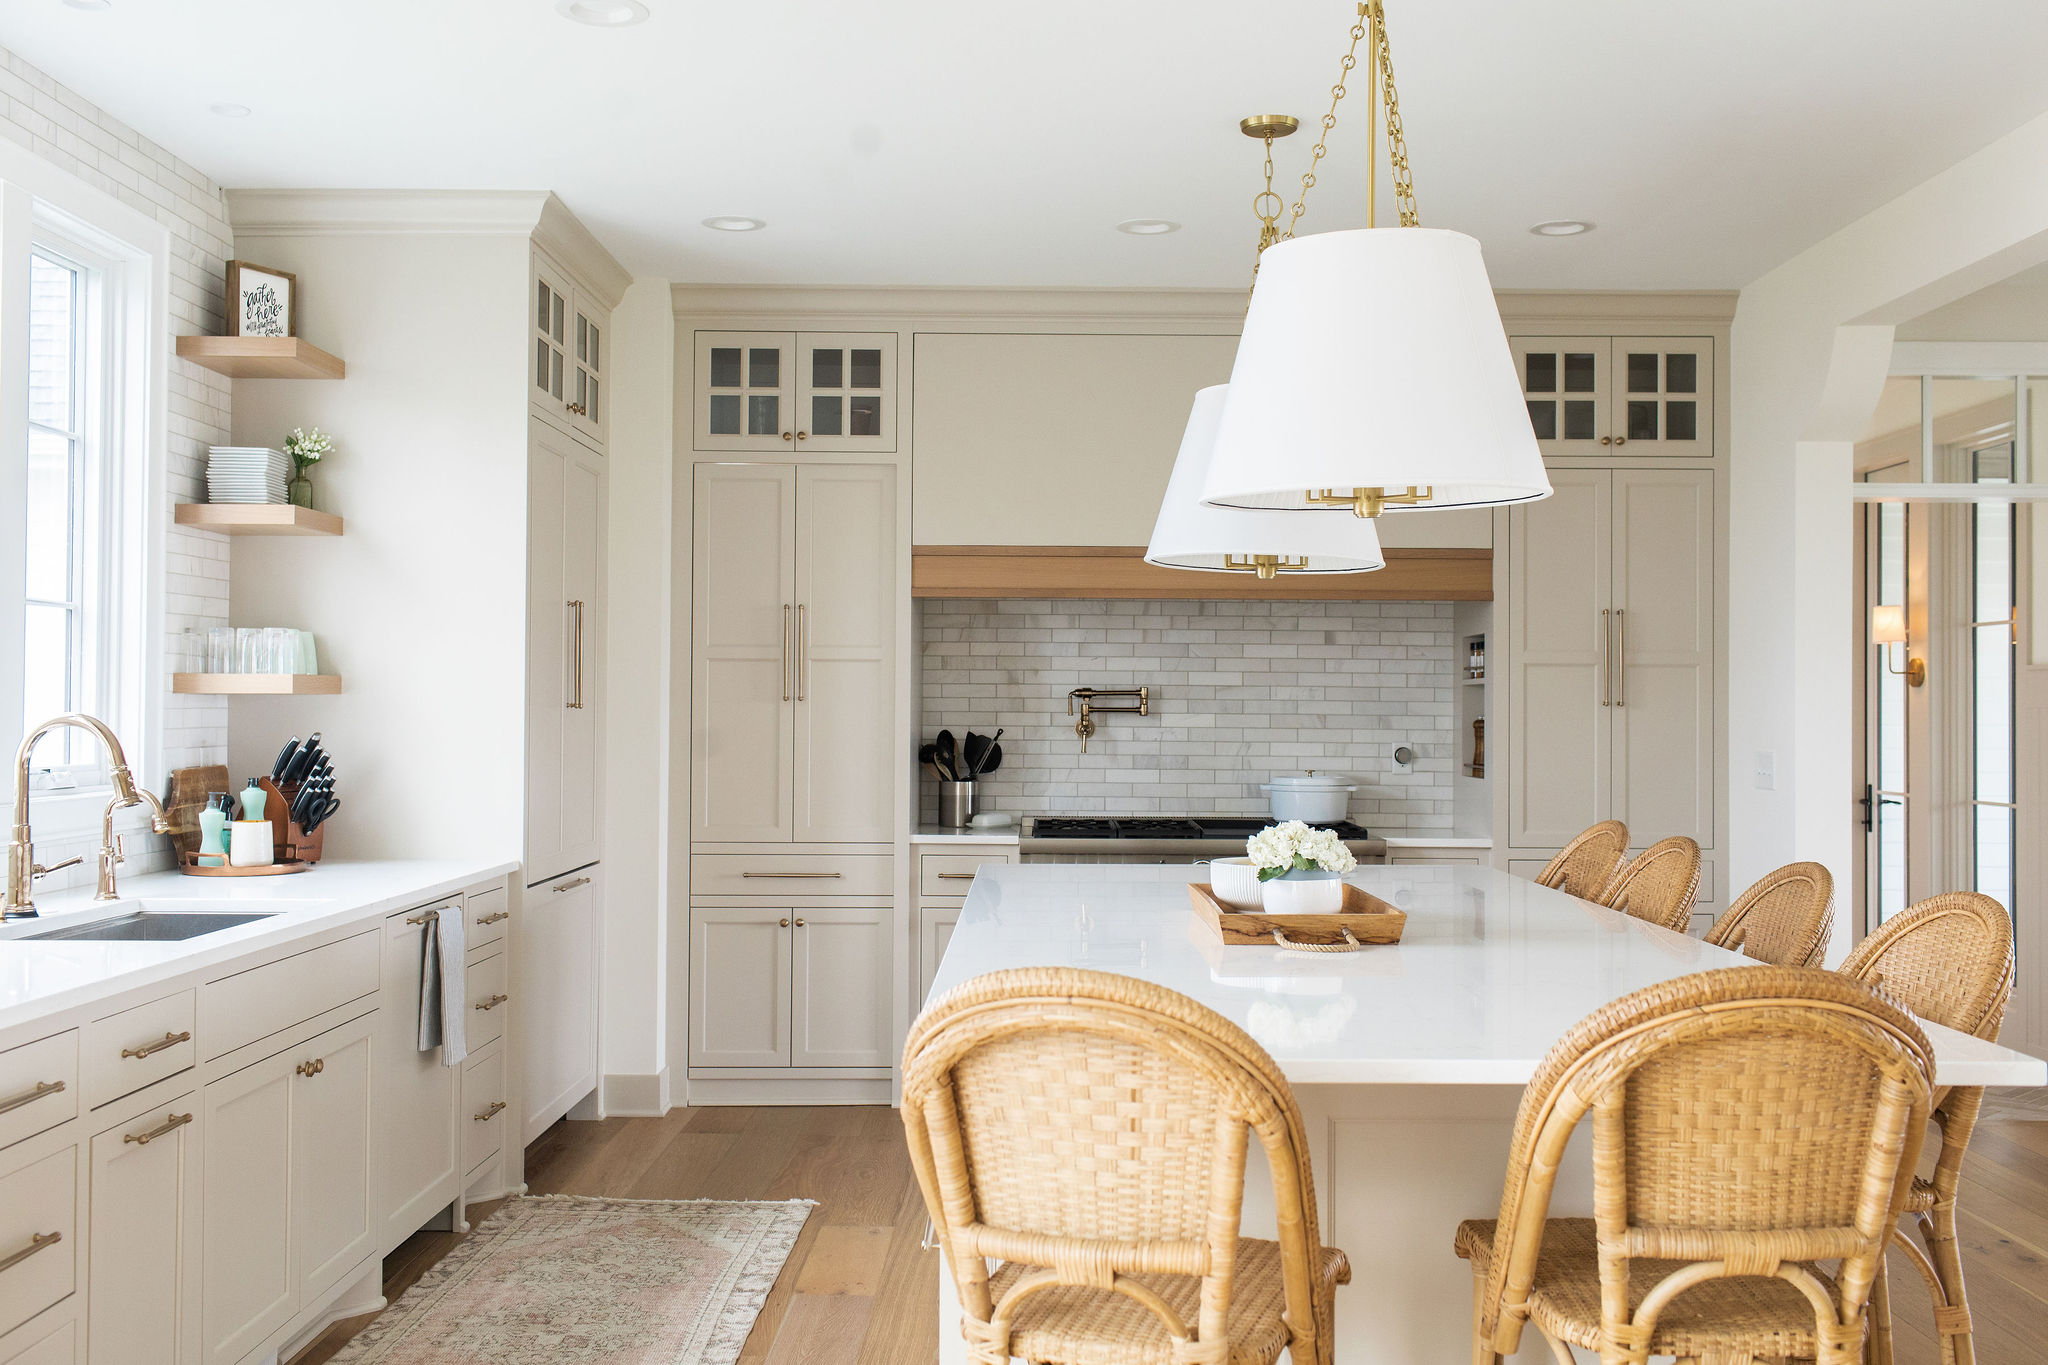 3 Neutral Kitchen Cabinet Colors that We Love for 2023